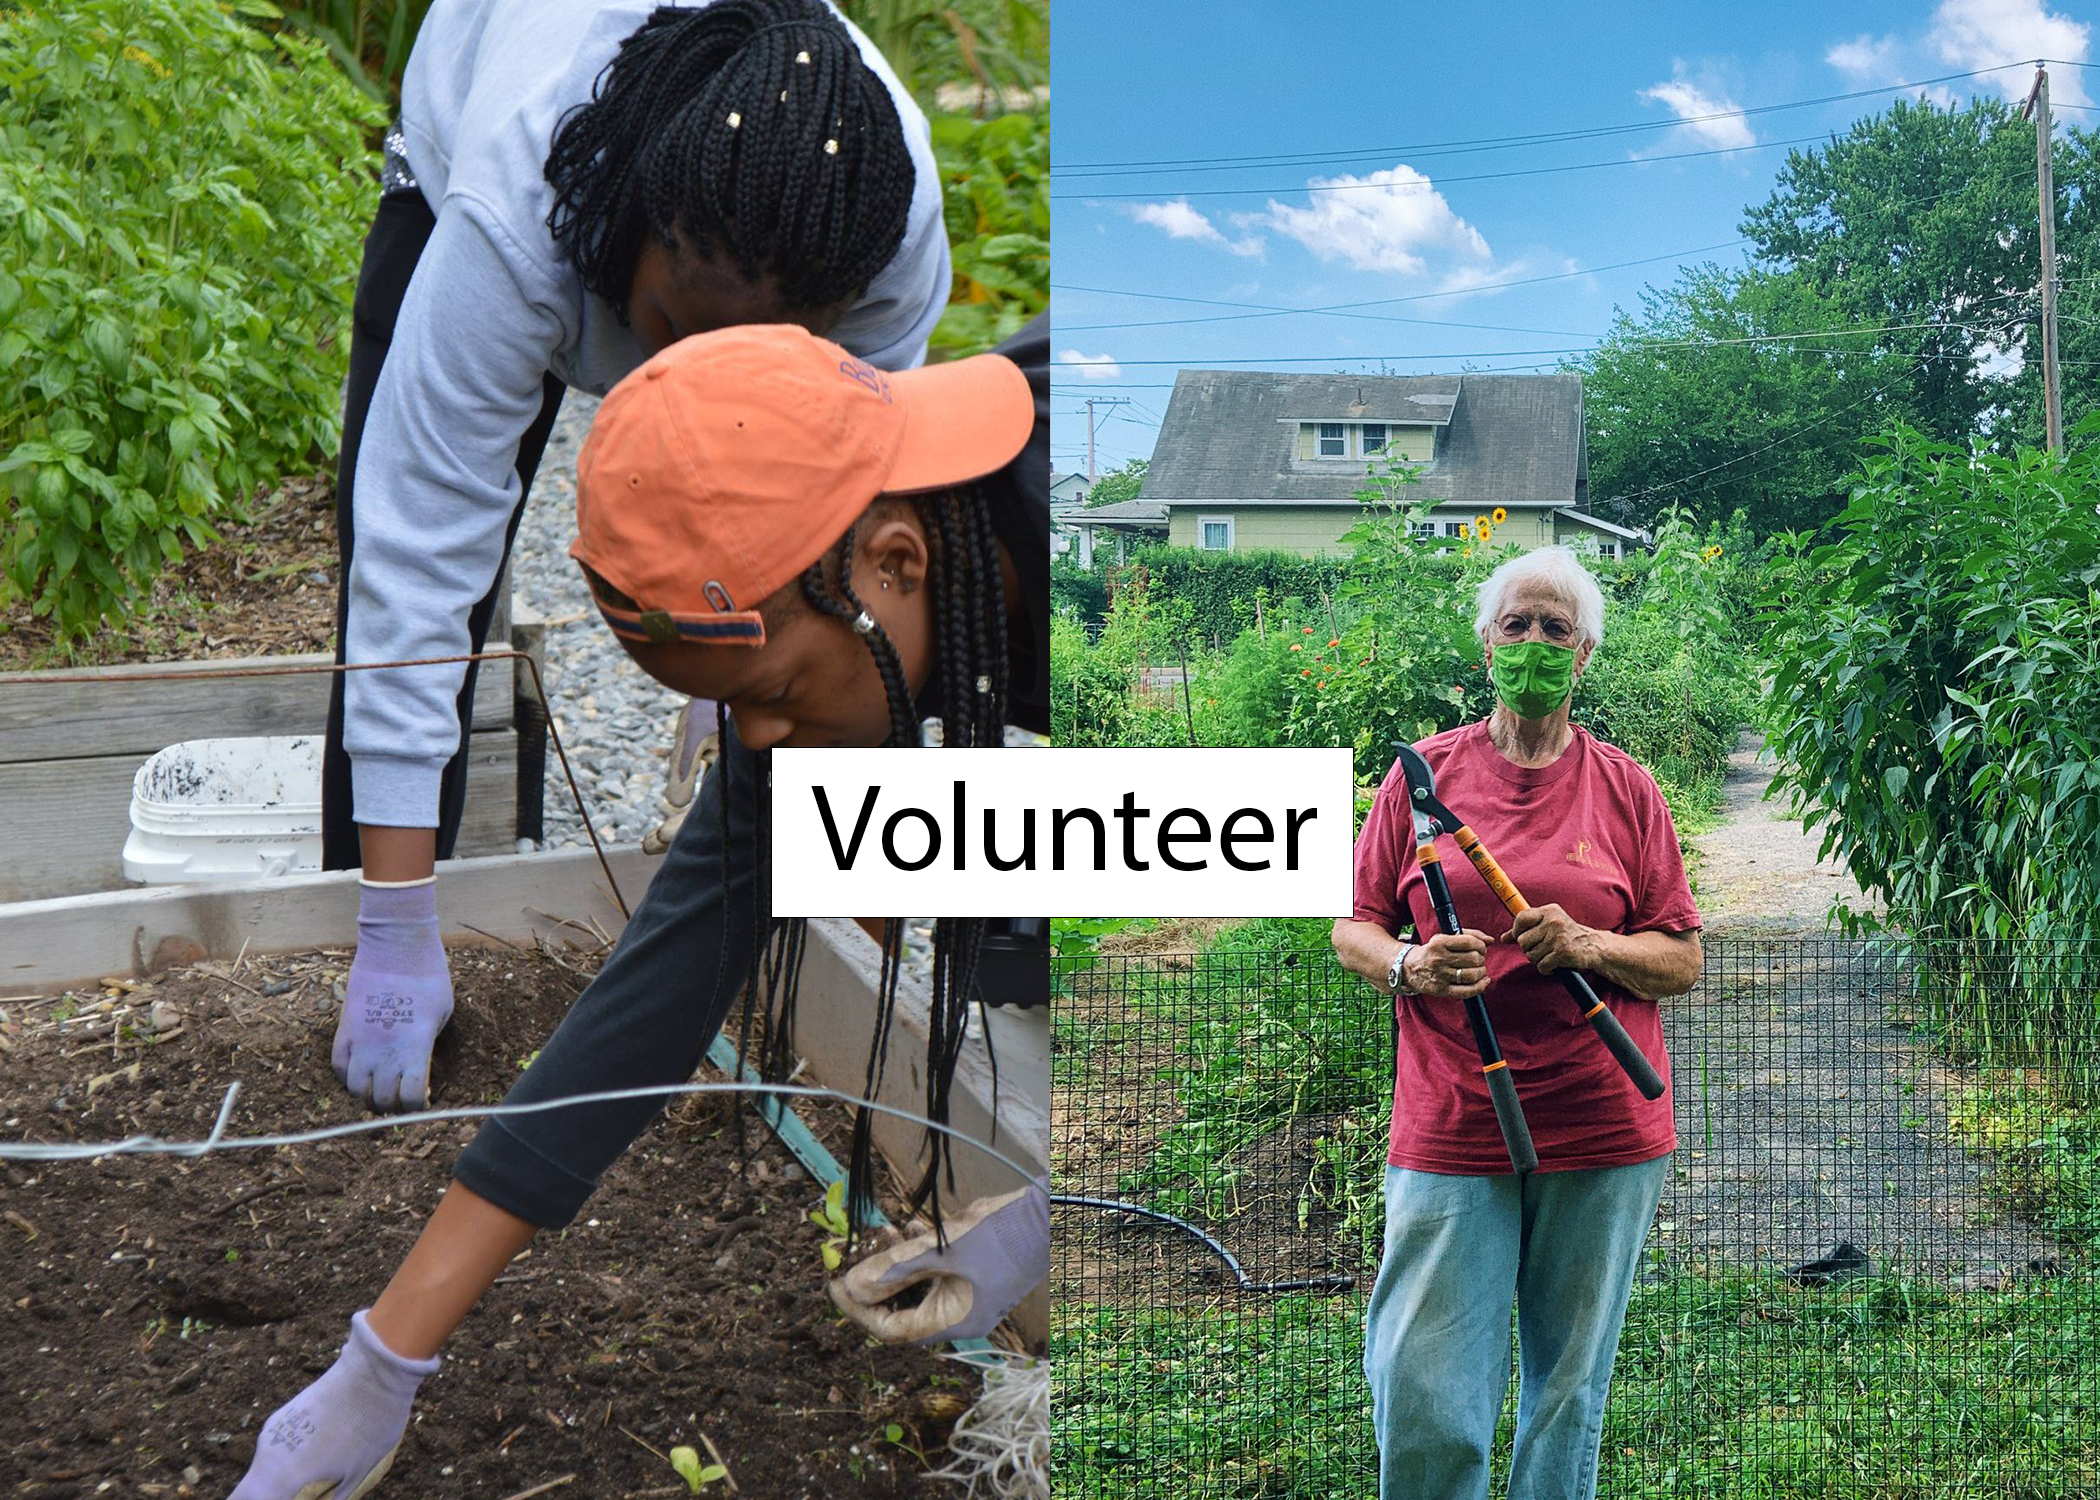 Images of people planting seeds and holding pruning shears. Labeled "Volunteer"